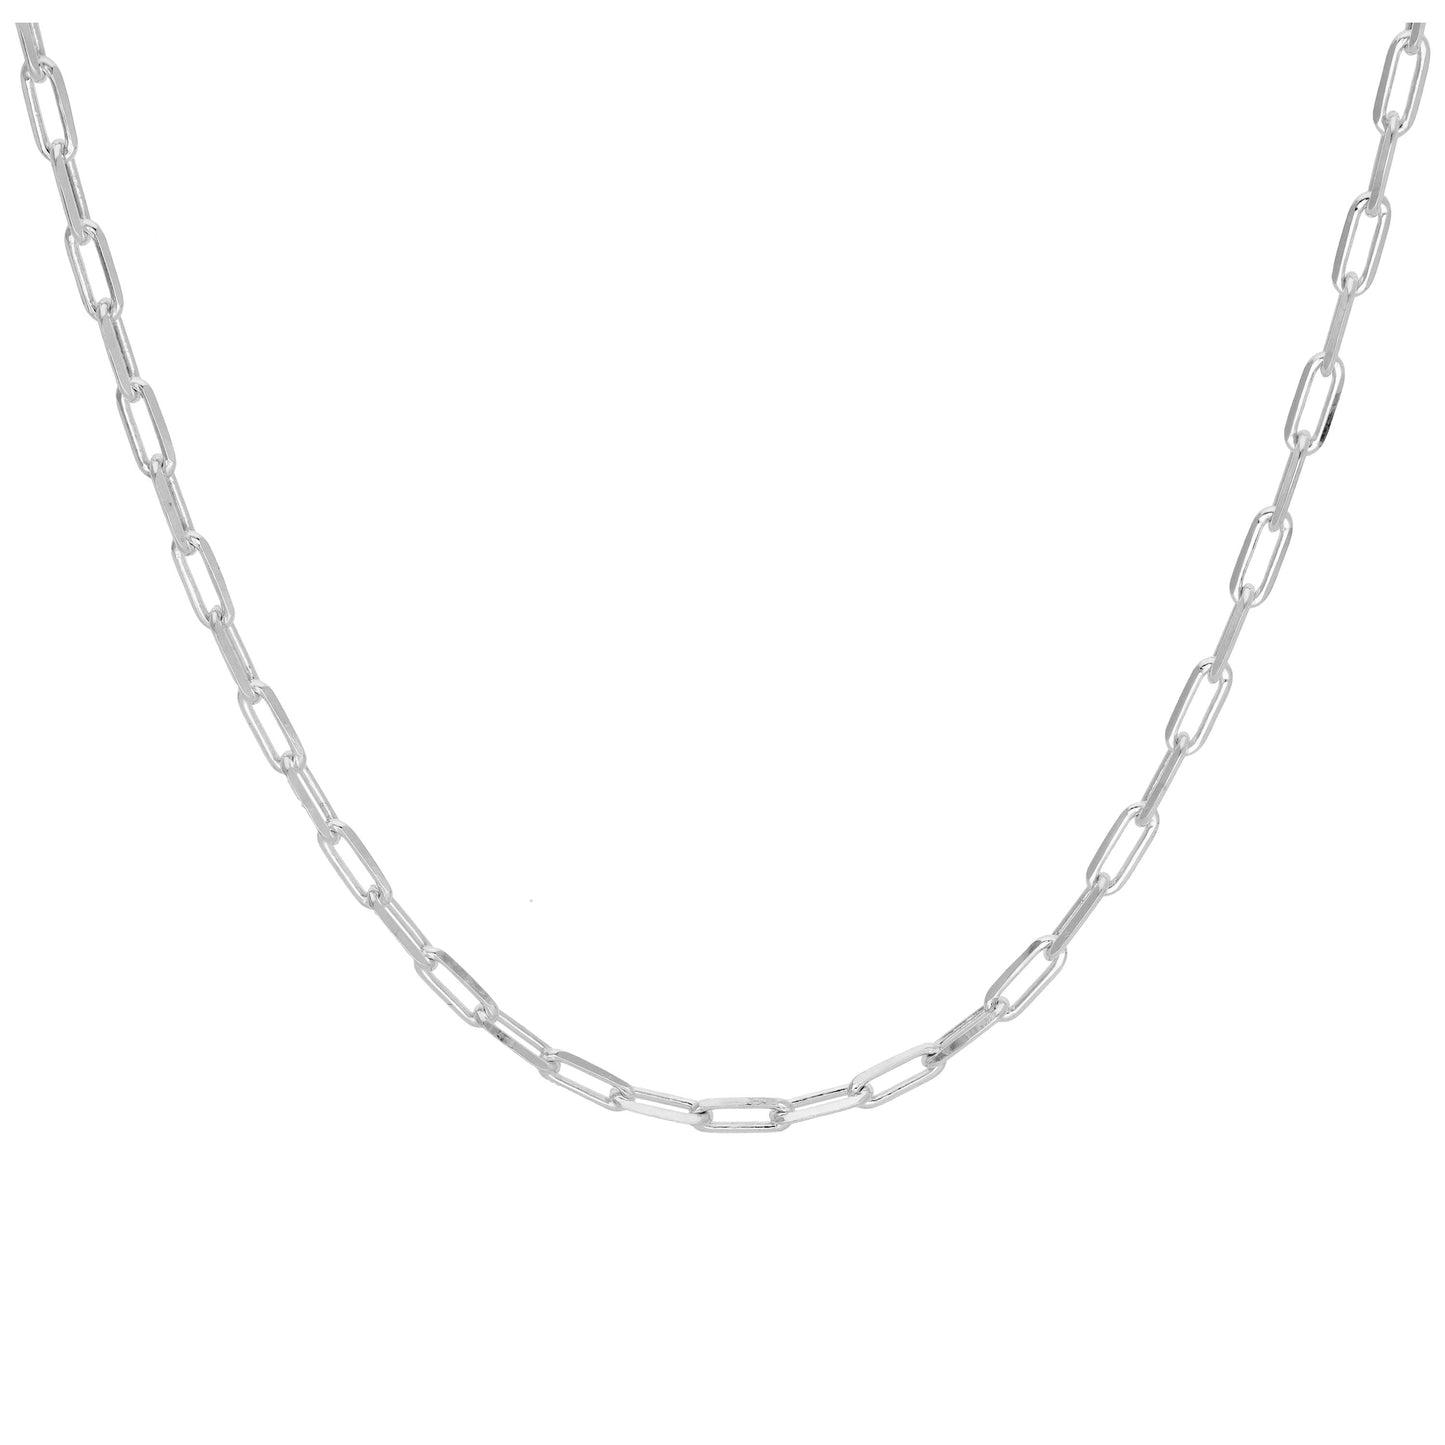 Sterling Silver Long Cable Link Chain Necklace 18 Inches